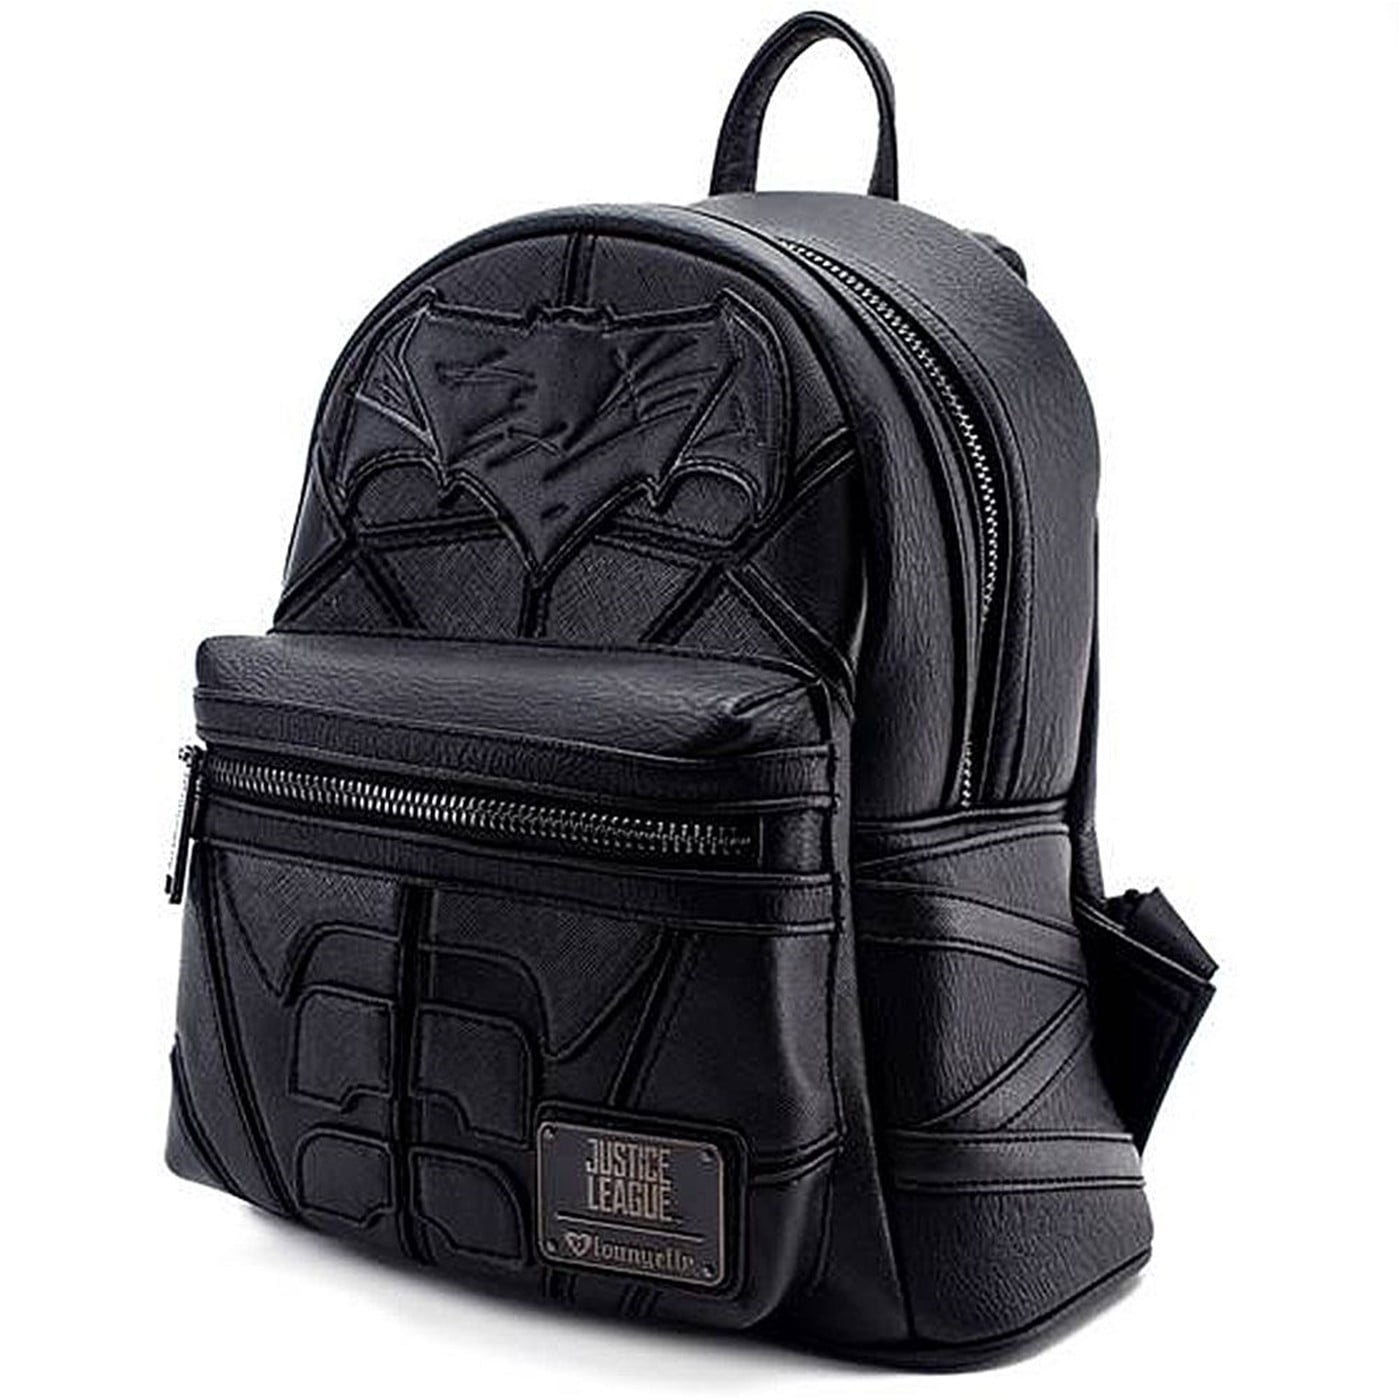 Justice League Mini Backpack 